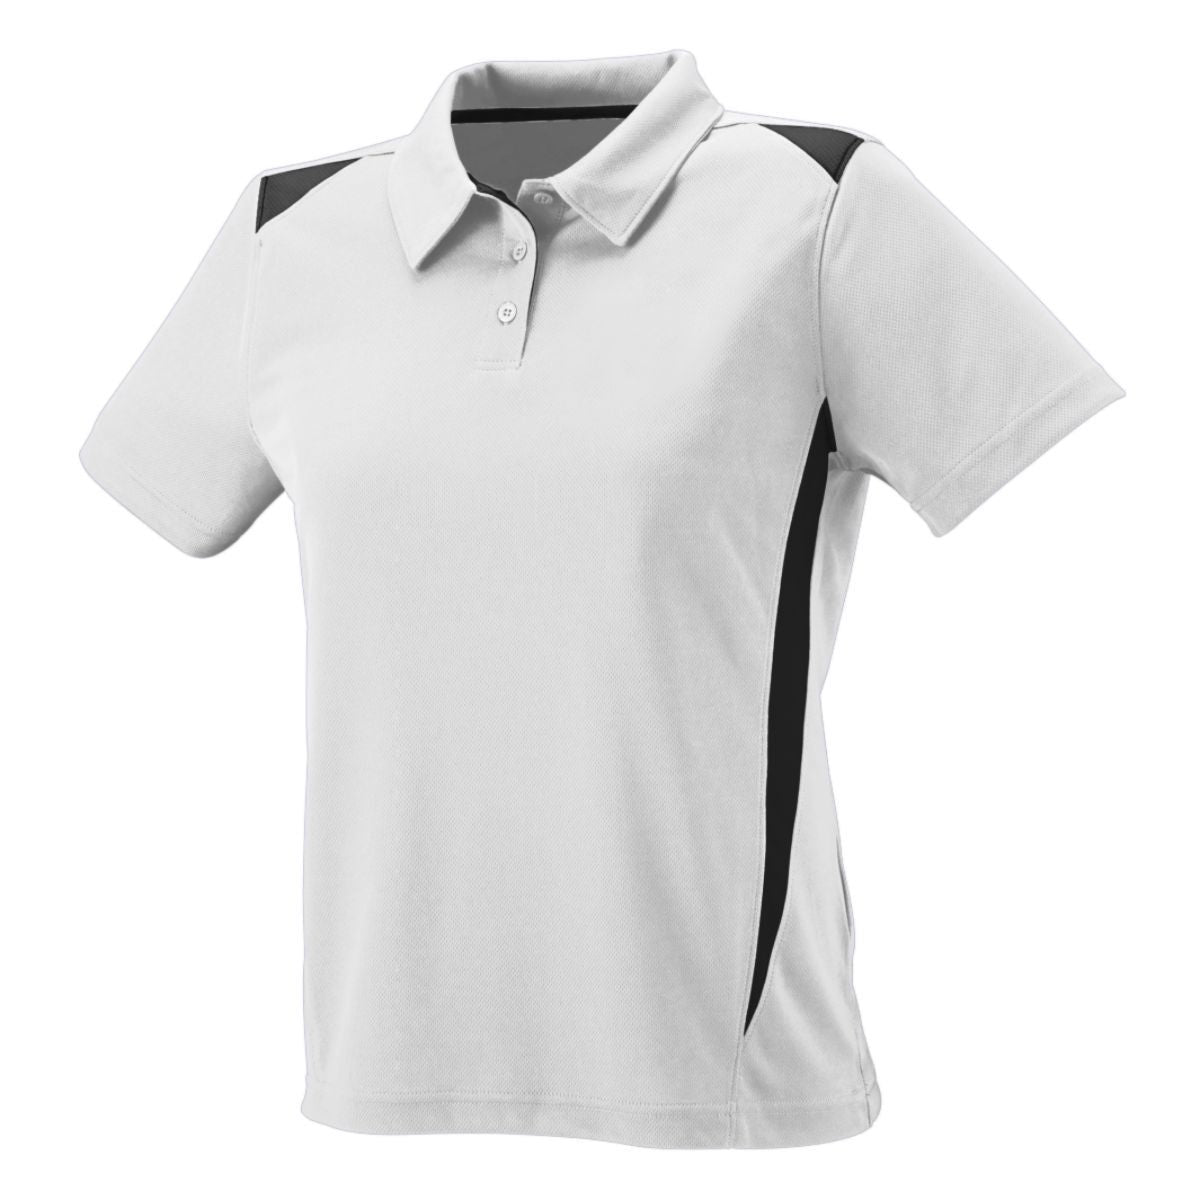 Augusta Sportswear Ladies Premier Polo in White/Black  -Part of the Ladies, Ladies-Polo, Polos, Augusta-Products, Shirts product lines at KanaleyCreations.com